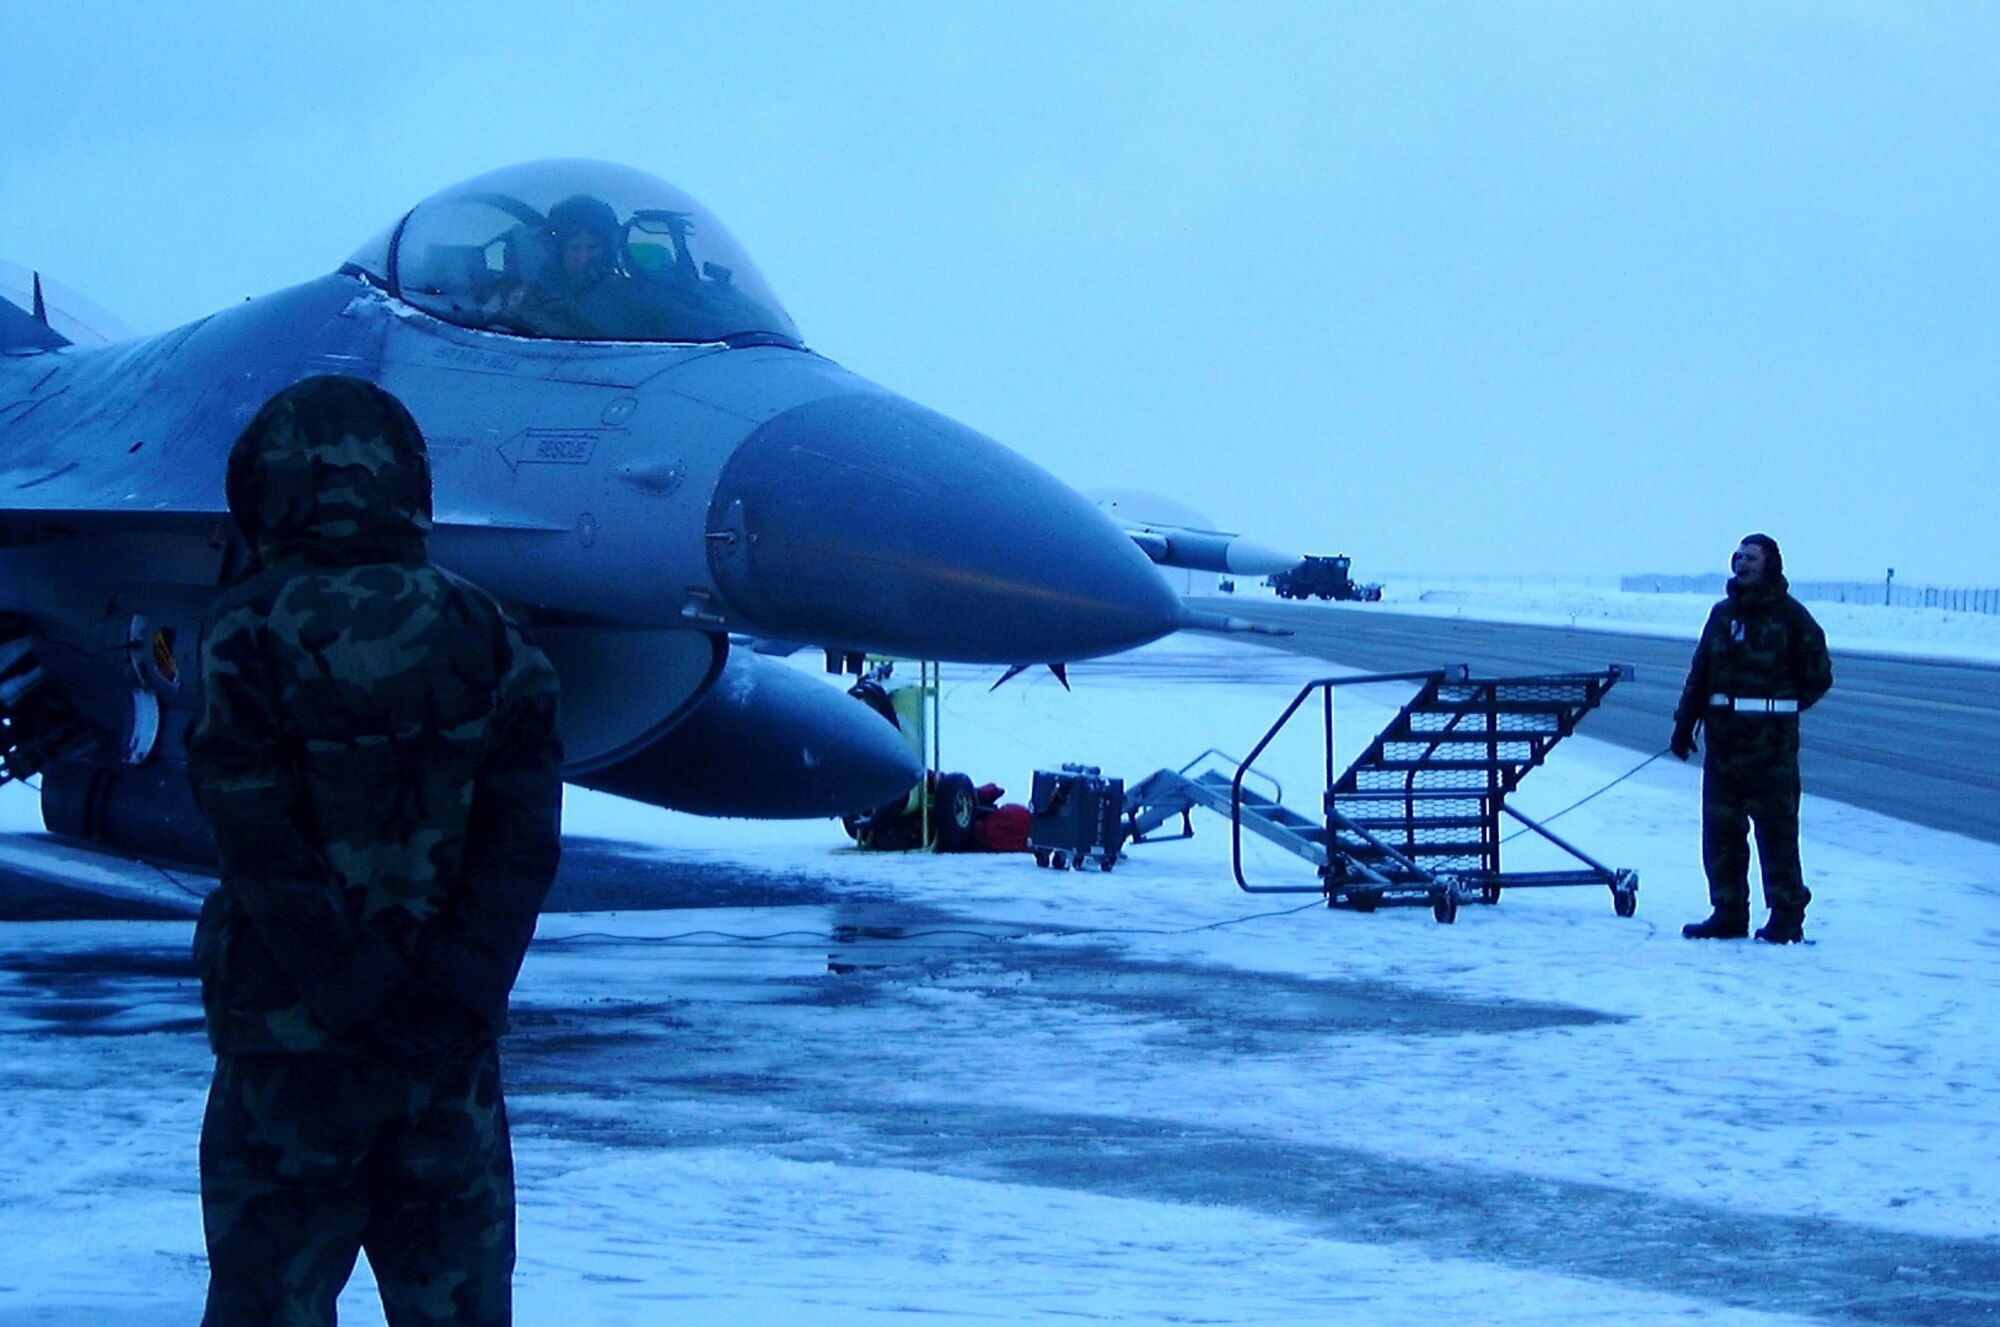 Airmen from the 388th prepare an F-16C sitting alert at an isolated part of Hill AFB for an ONE sortie during the Olympics in February 2002.